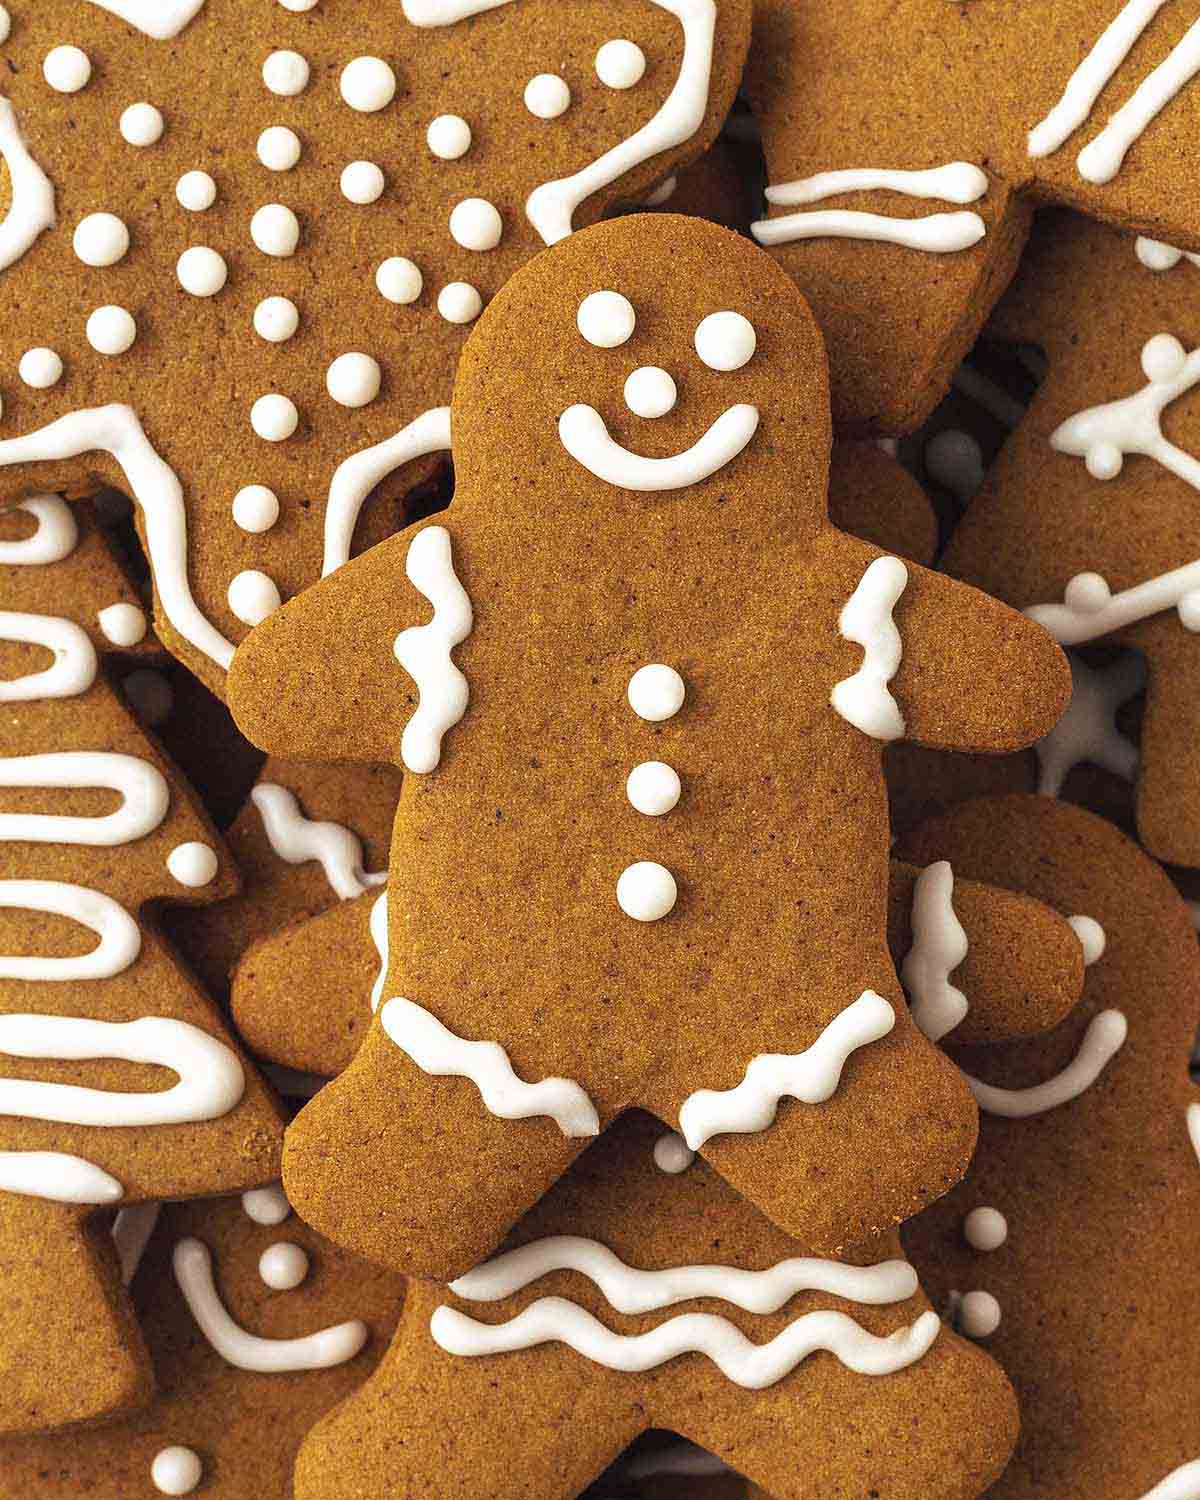 A pile of decorated vegan gingerbread cookies stacked on top of each other with a gingerbread man on top.